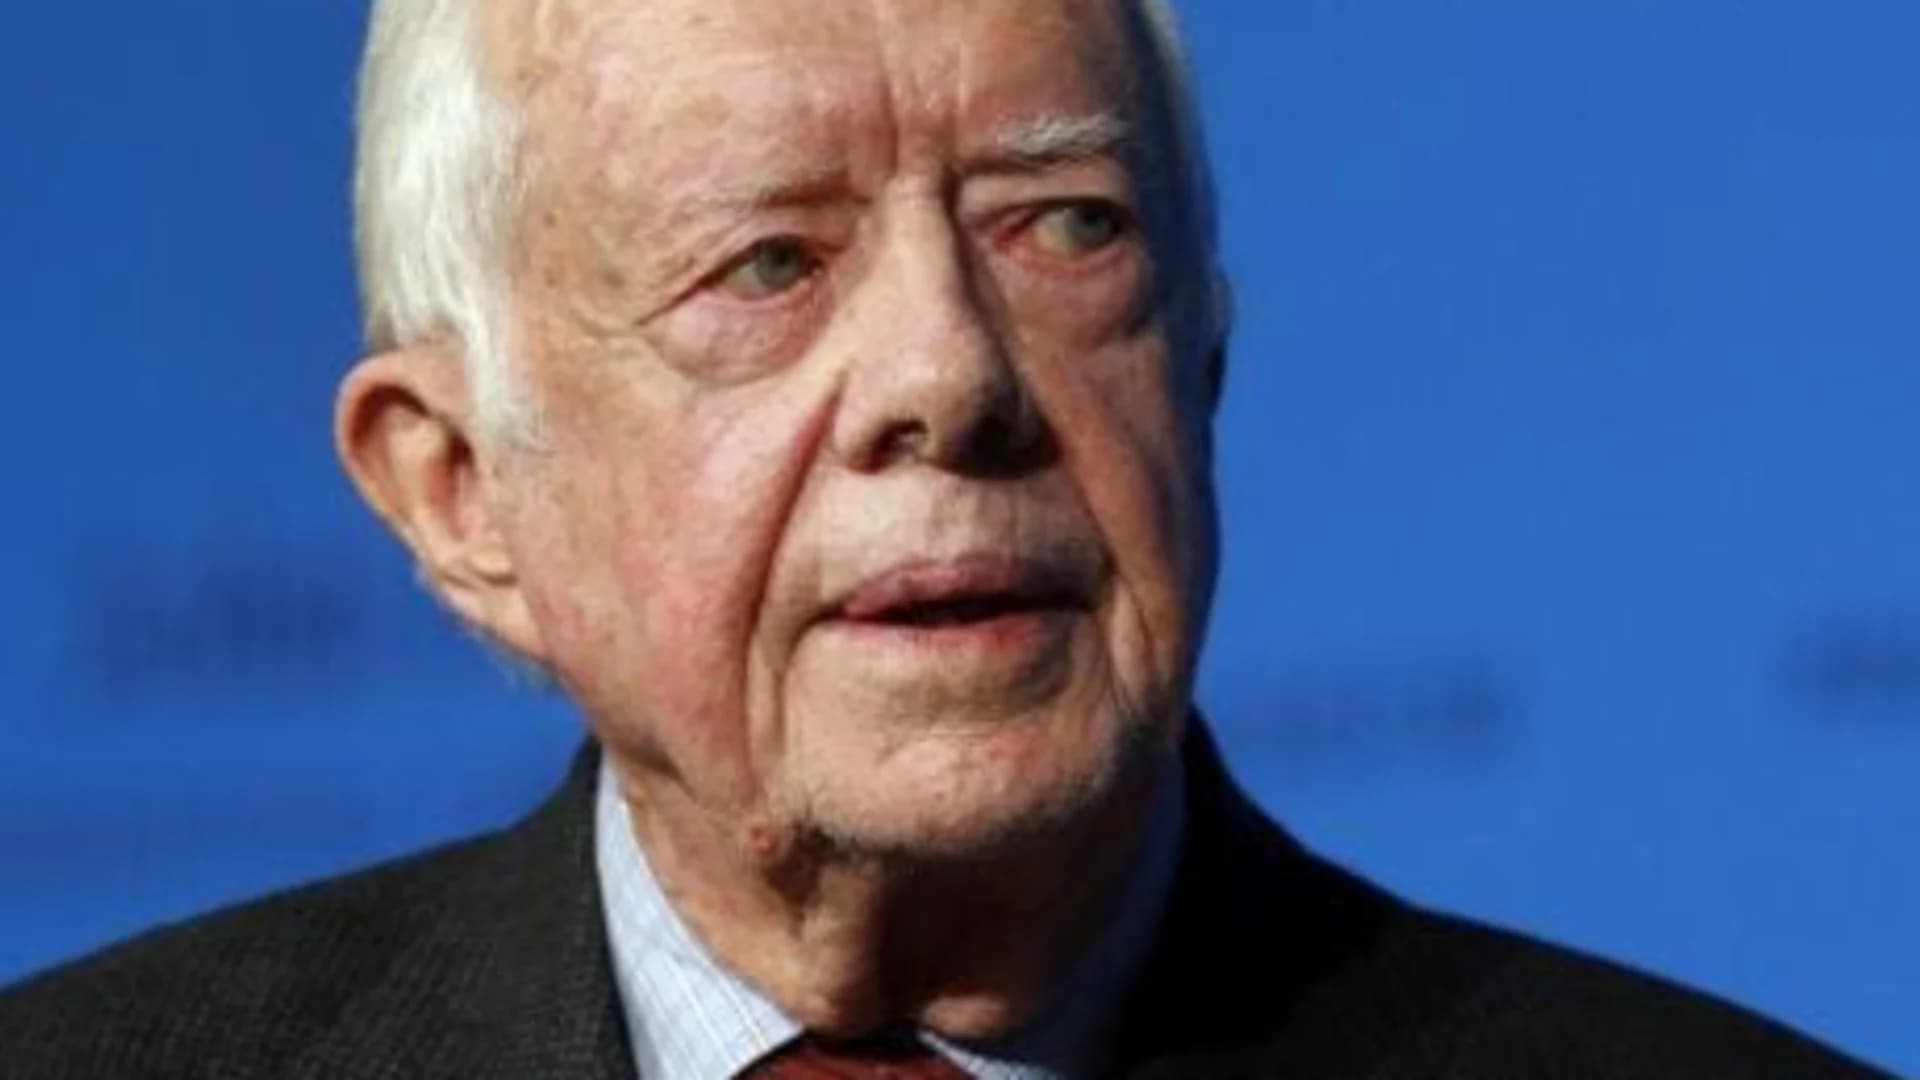 Former President Carter out of surgery, no complications